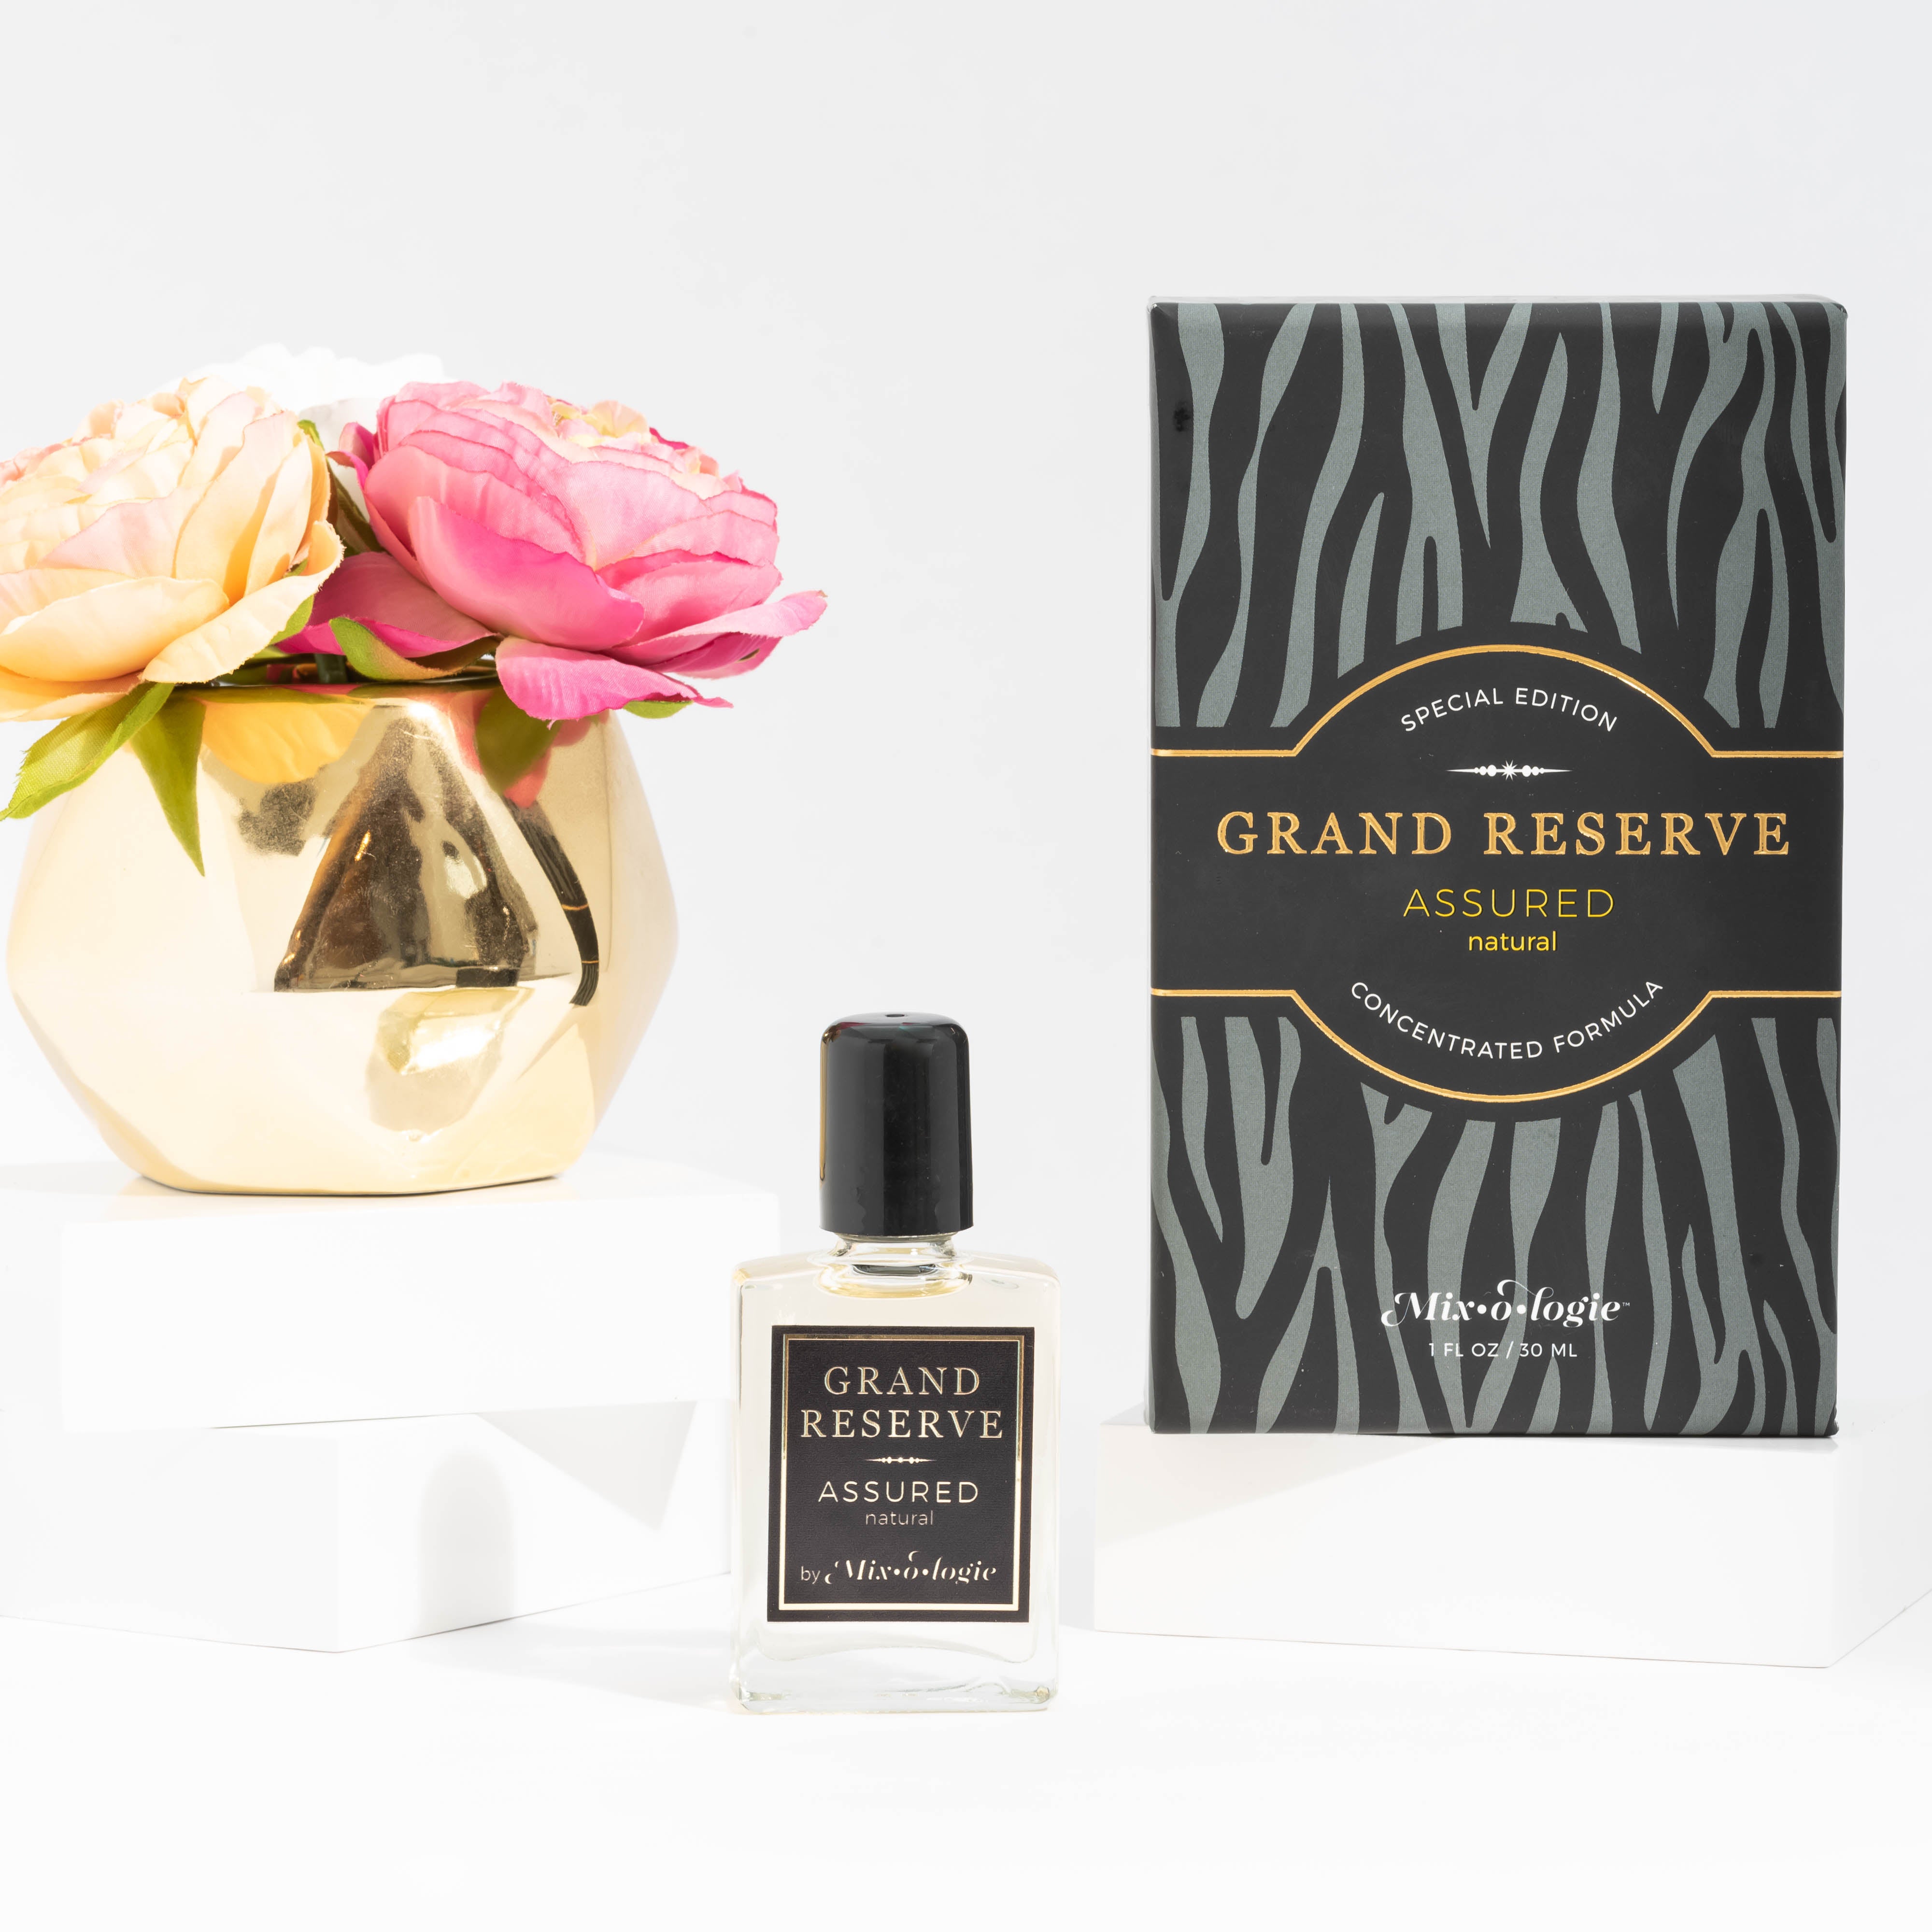 Assured (Natural) Special Edition Grand Reserve concentrated formula in clear glass rectangle perfume bottle that has 1 fl oz or 30 mL of light-yellow liquid with black cap, label, and spray nozzle. Black zebra pattern rectangle box with mustard letting. Grand Reserve and box pictured with white background and gold vase with pink flowers.  